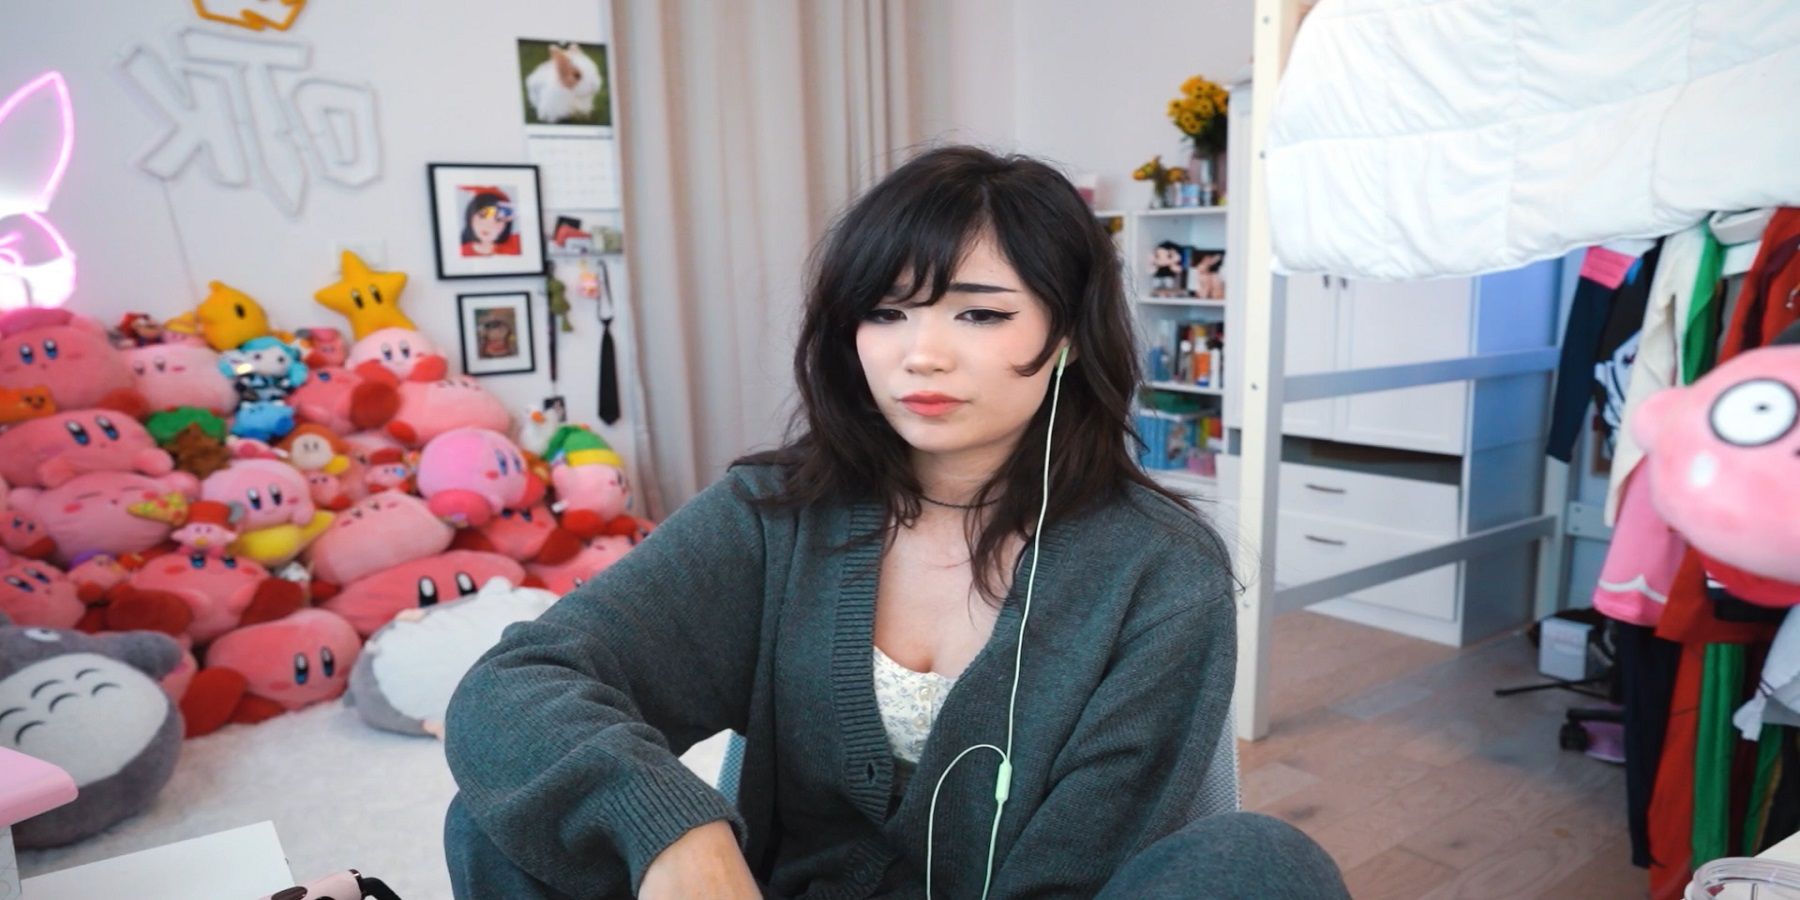 Emiru gave her thoughts on stream about the allegations against Mizkif and CrazySlick.